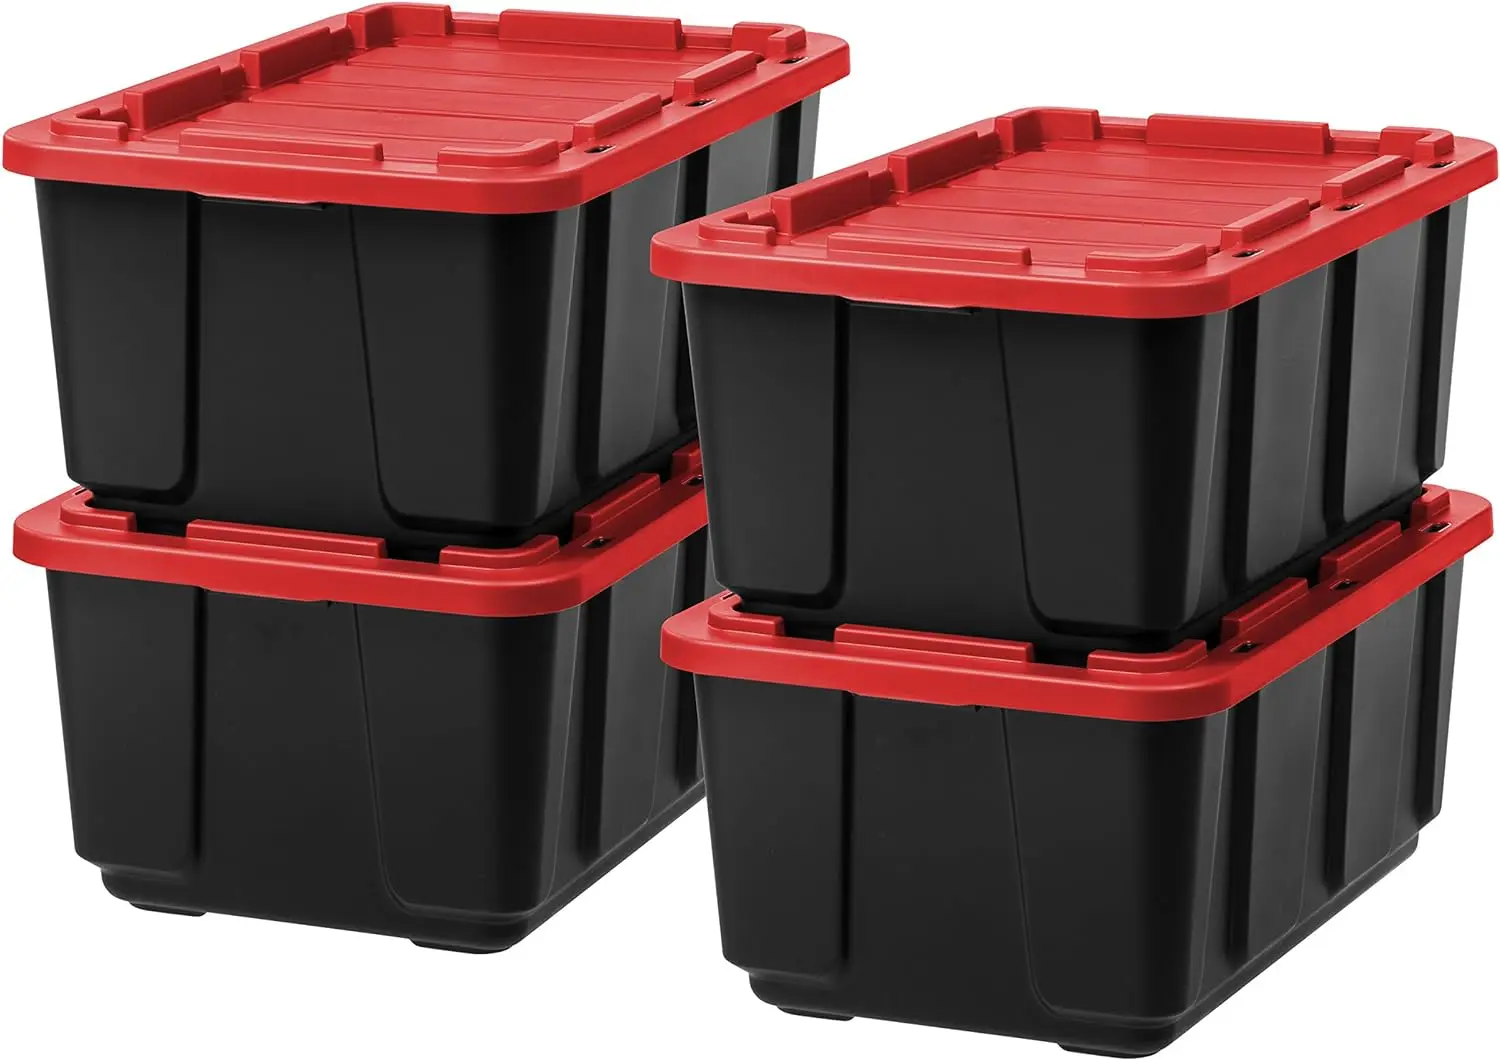 

IRIS USA 27 Gallon Large Heavy-Duty Storage Plastic Bin Tote Organizing Container with Durable Lid, Black/Red, 4 Pack